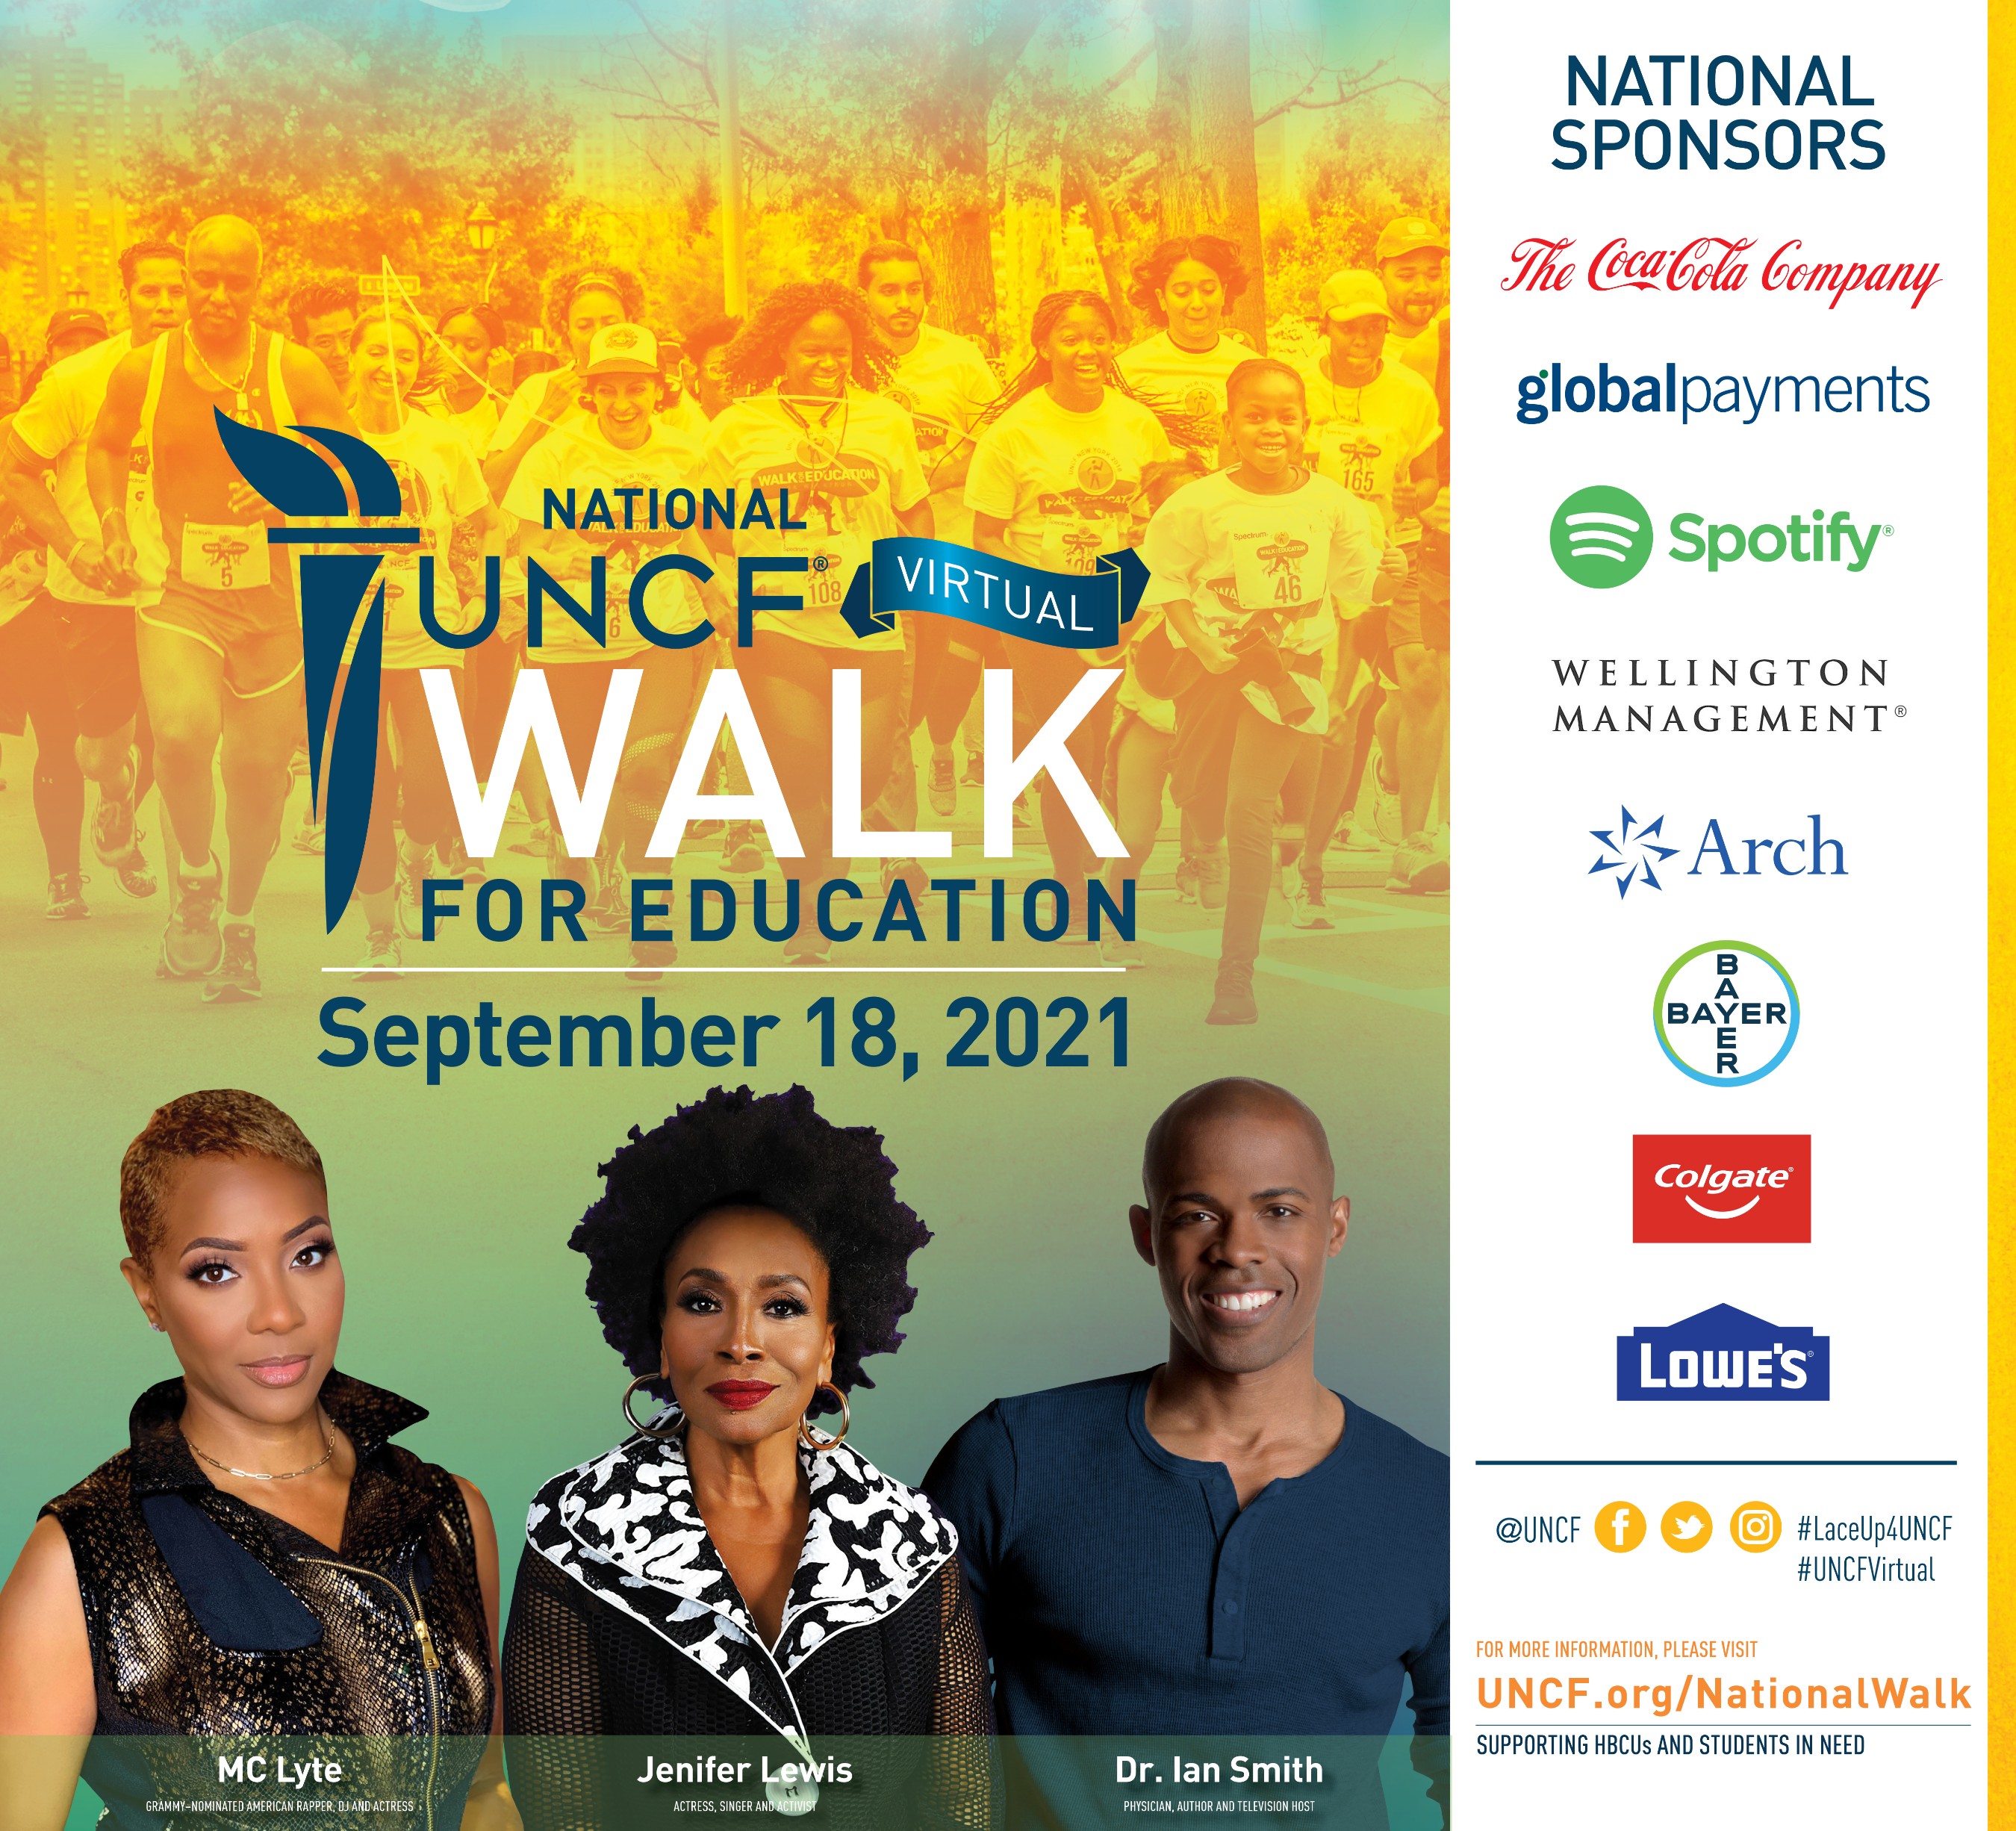 UNCF National Virtual Walk for Education